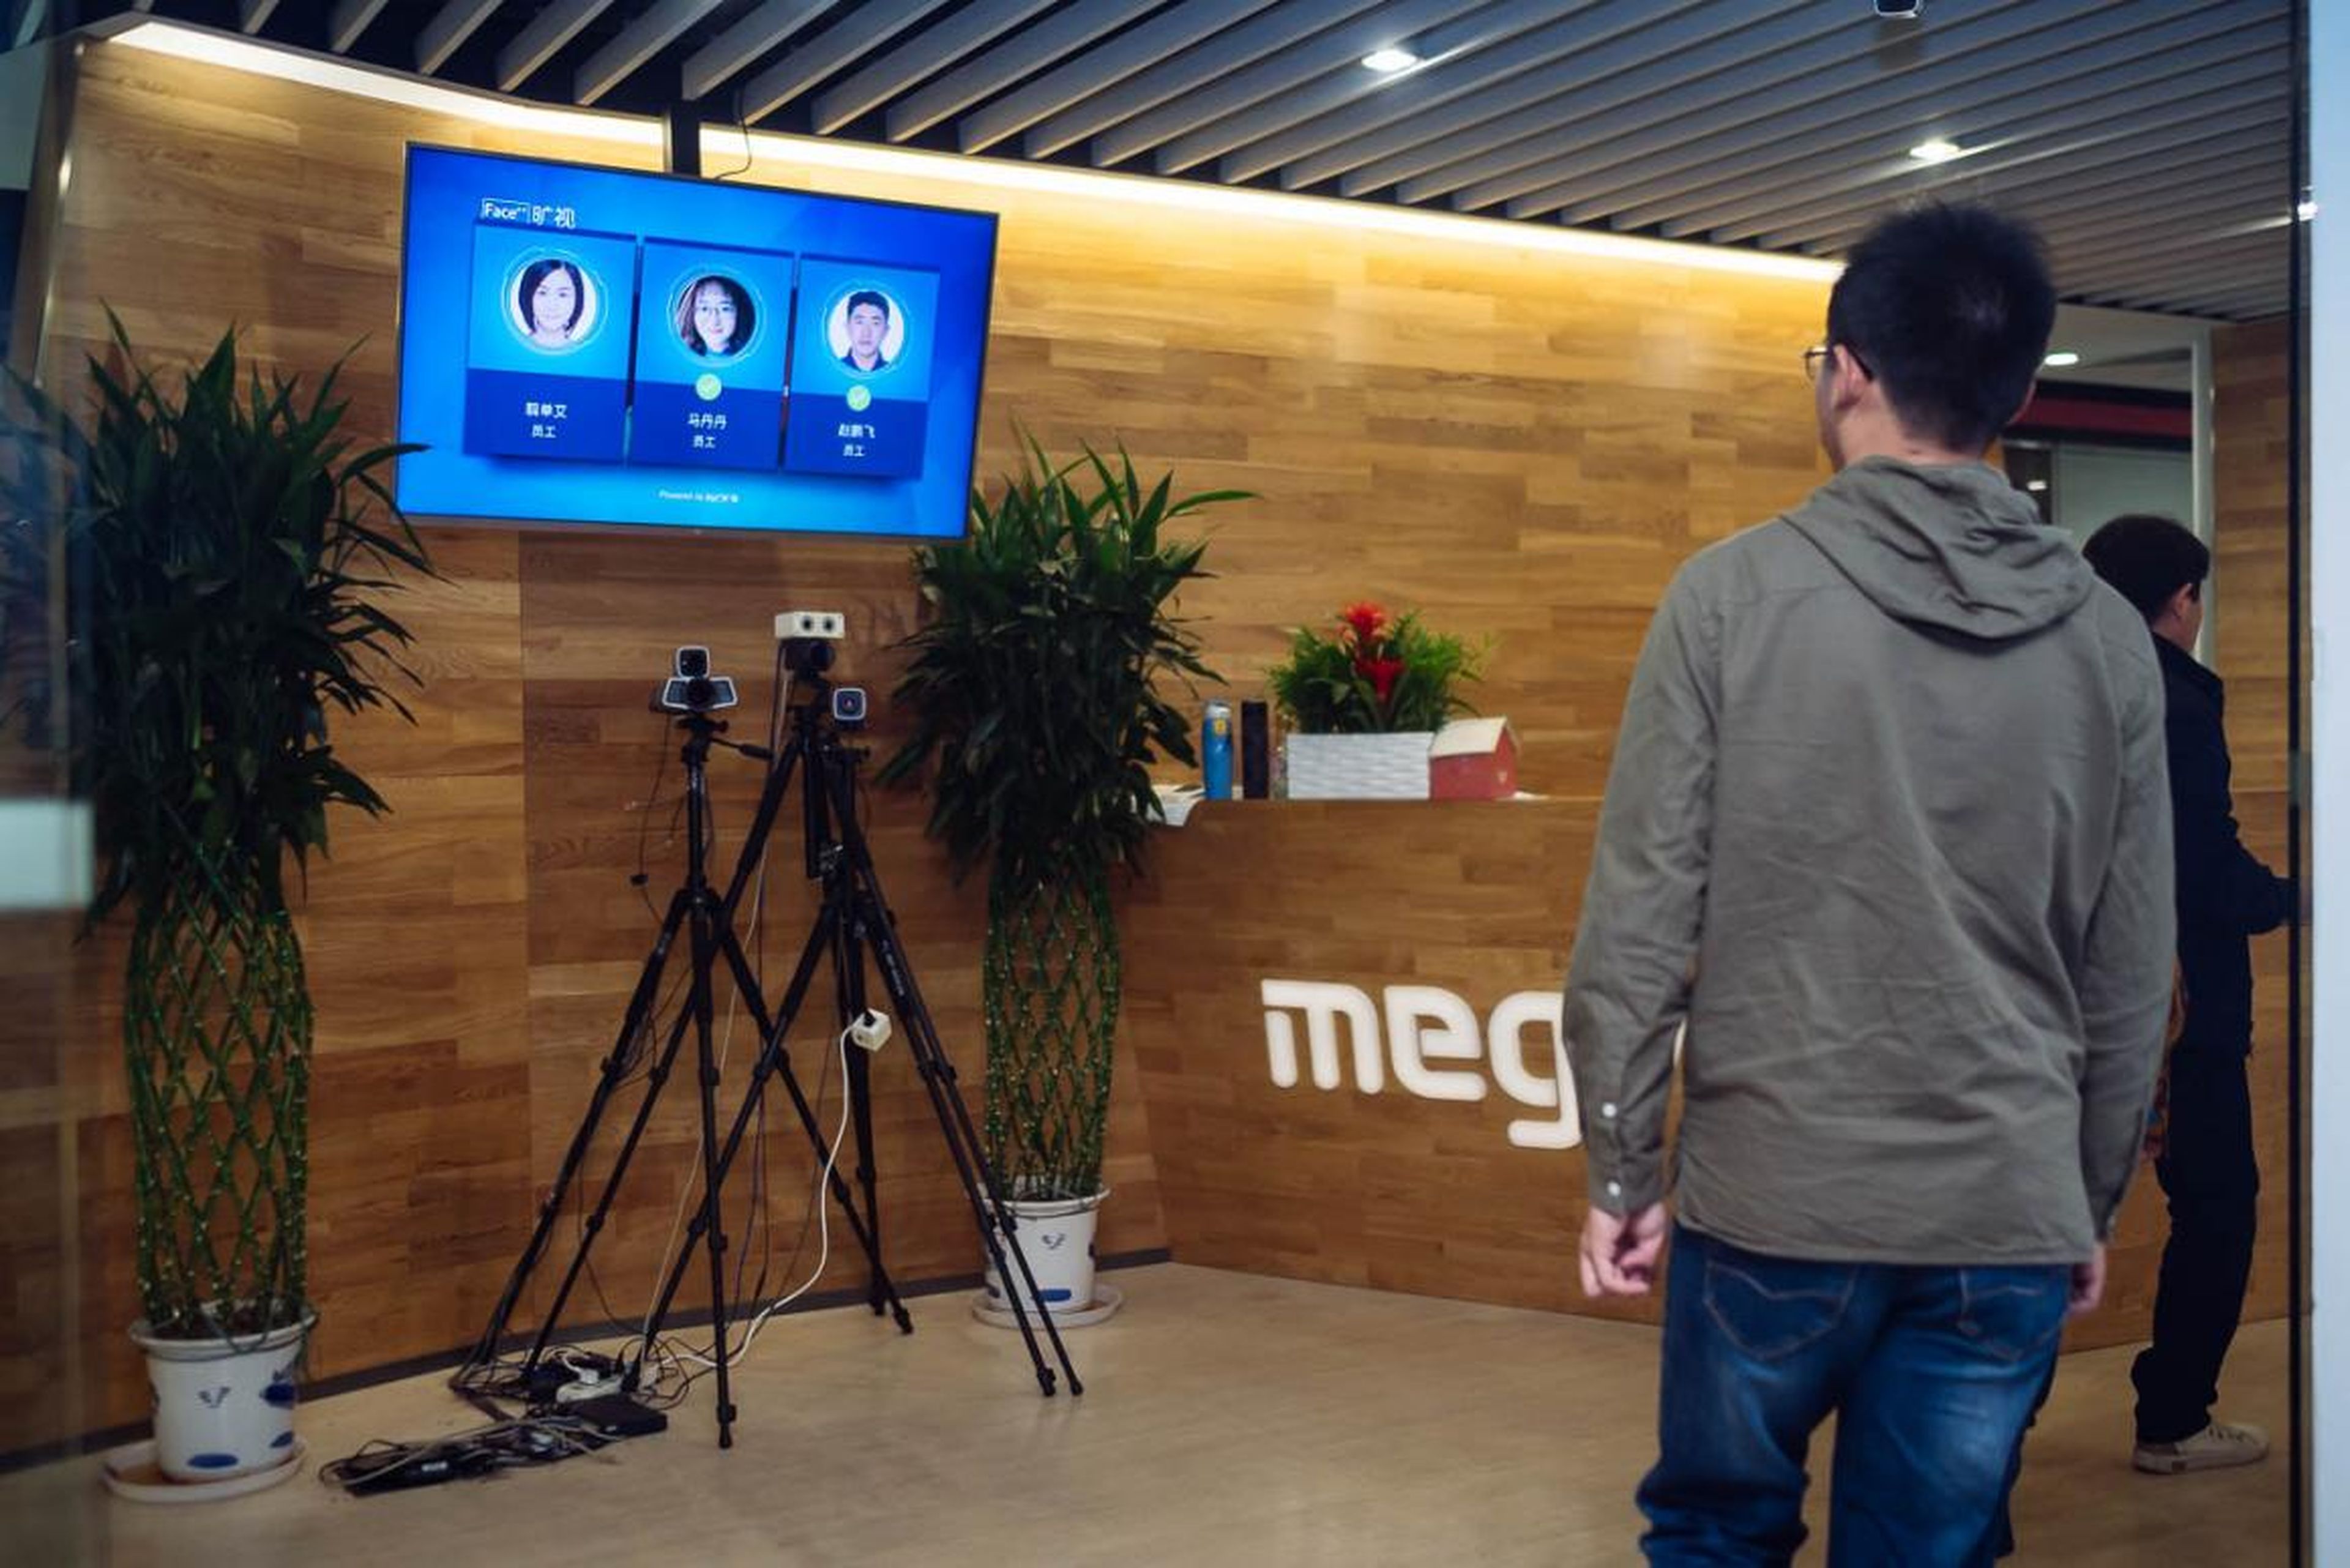 The system can handle multiple faces at once. As employees returned from lunch, each of their faces popped up on the screen. Currently, Face++ is being used in a number of industries in China, according to Xie Yinan, Megvii's vice